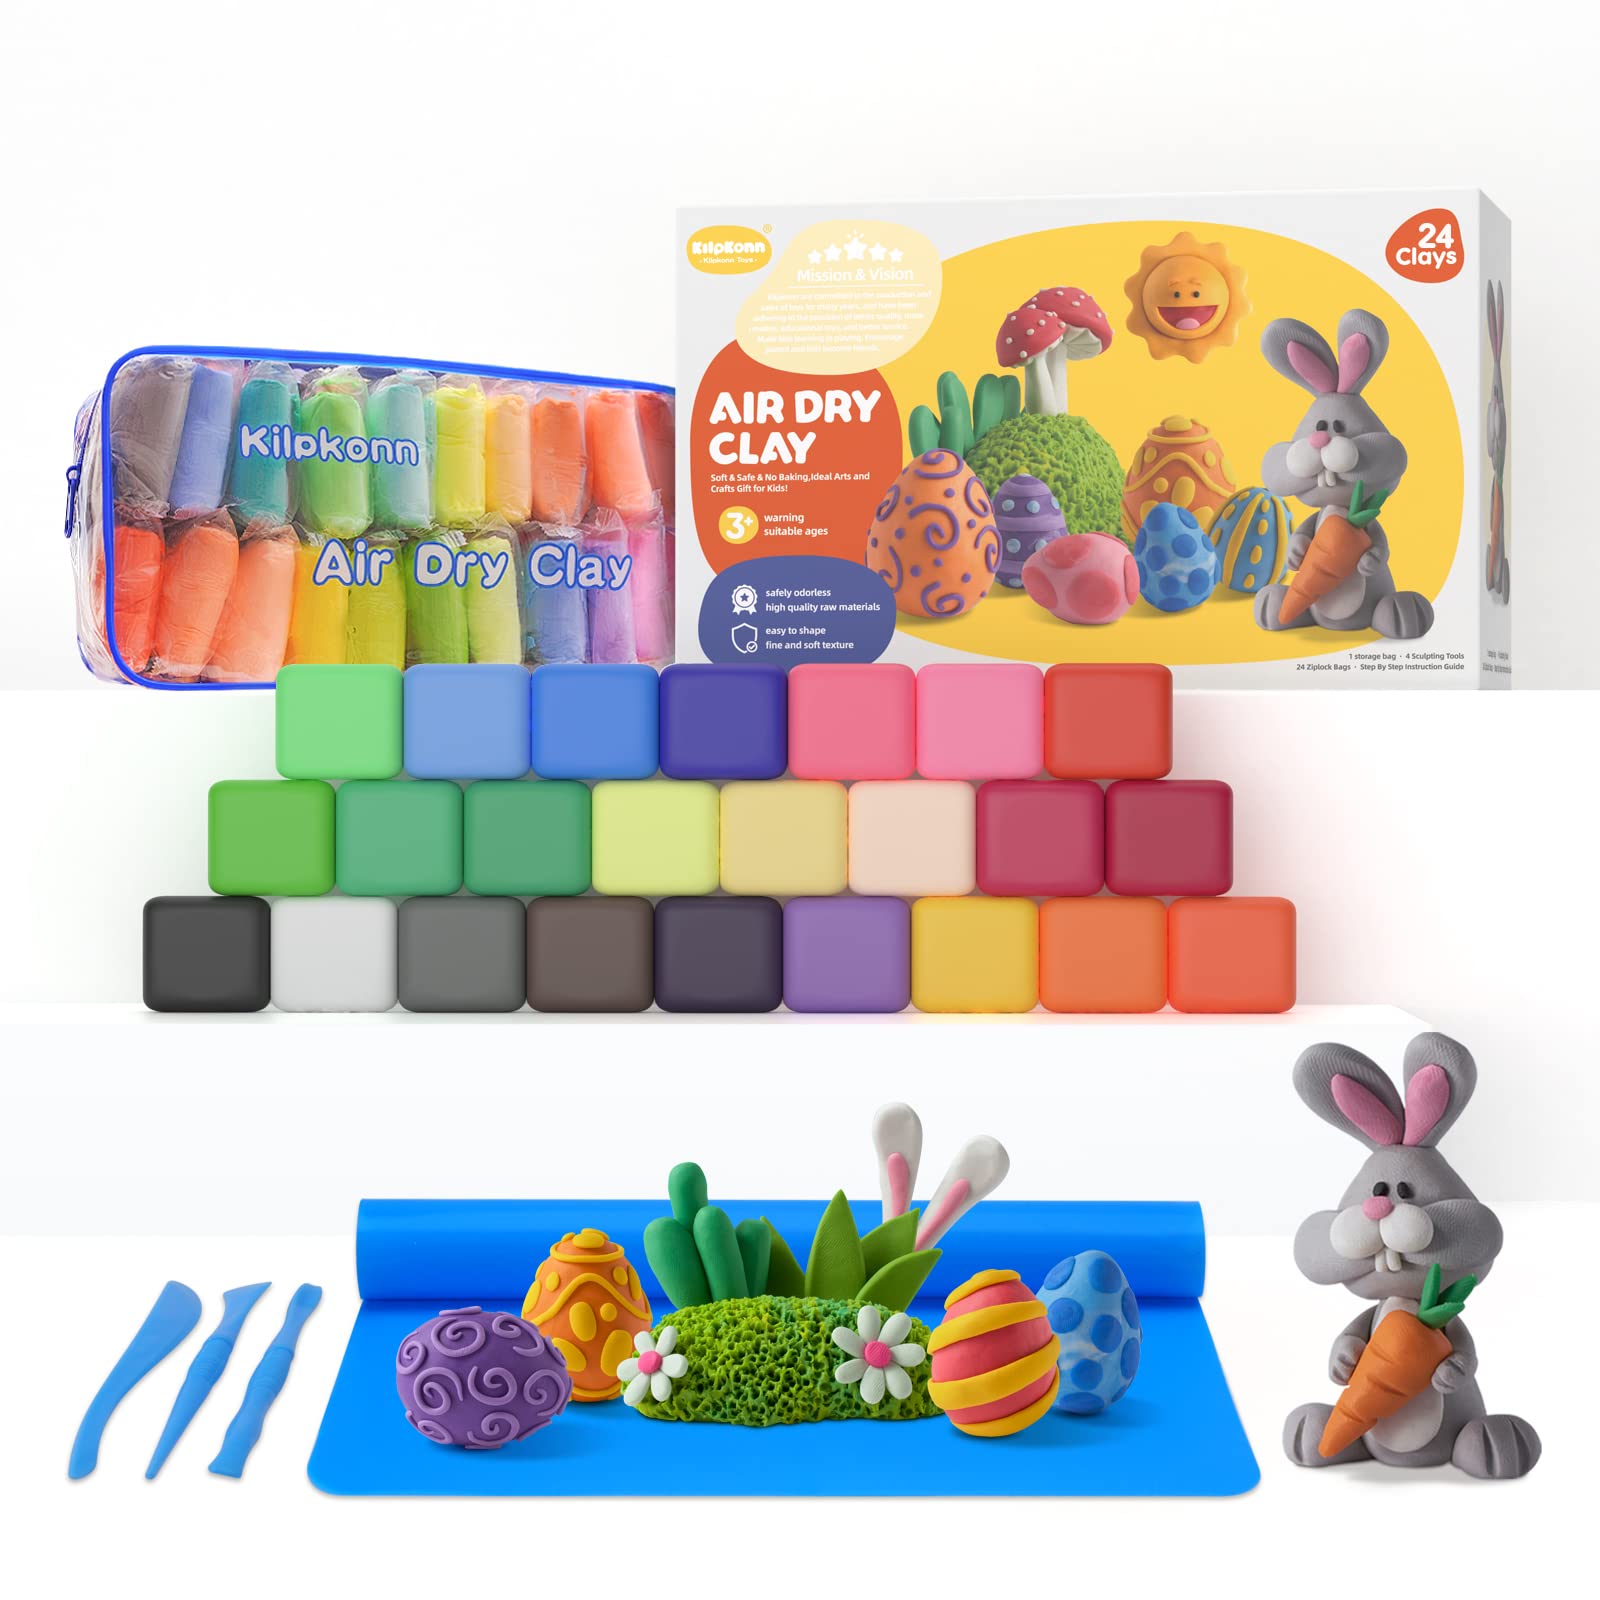 Kilpkonn Air Dry Clay 24 Colors Modeling Clay with Play Mat & 3 Sculpting  Tools Soft & Safe & No Baking Ideal Arts and Crafts Gift for Kids 24 Clays